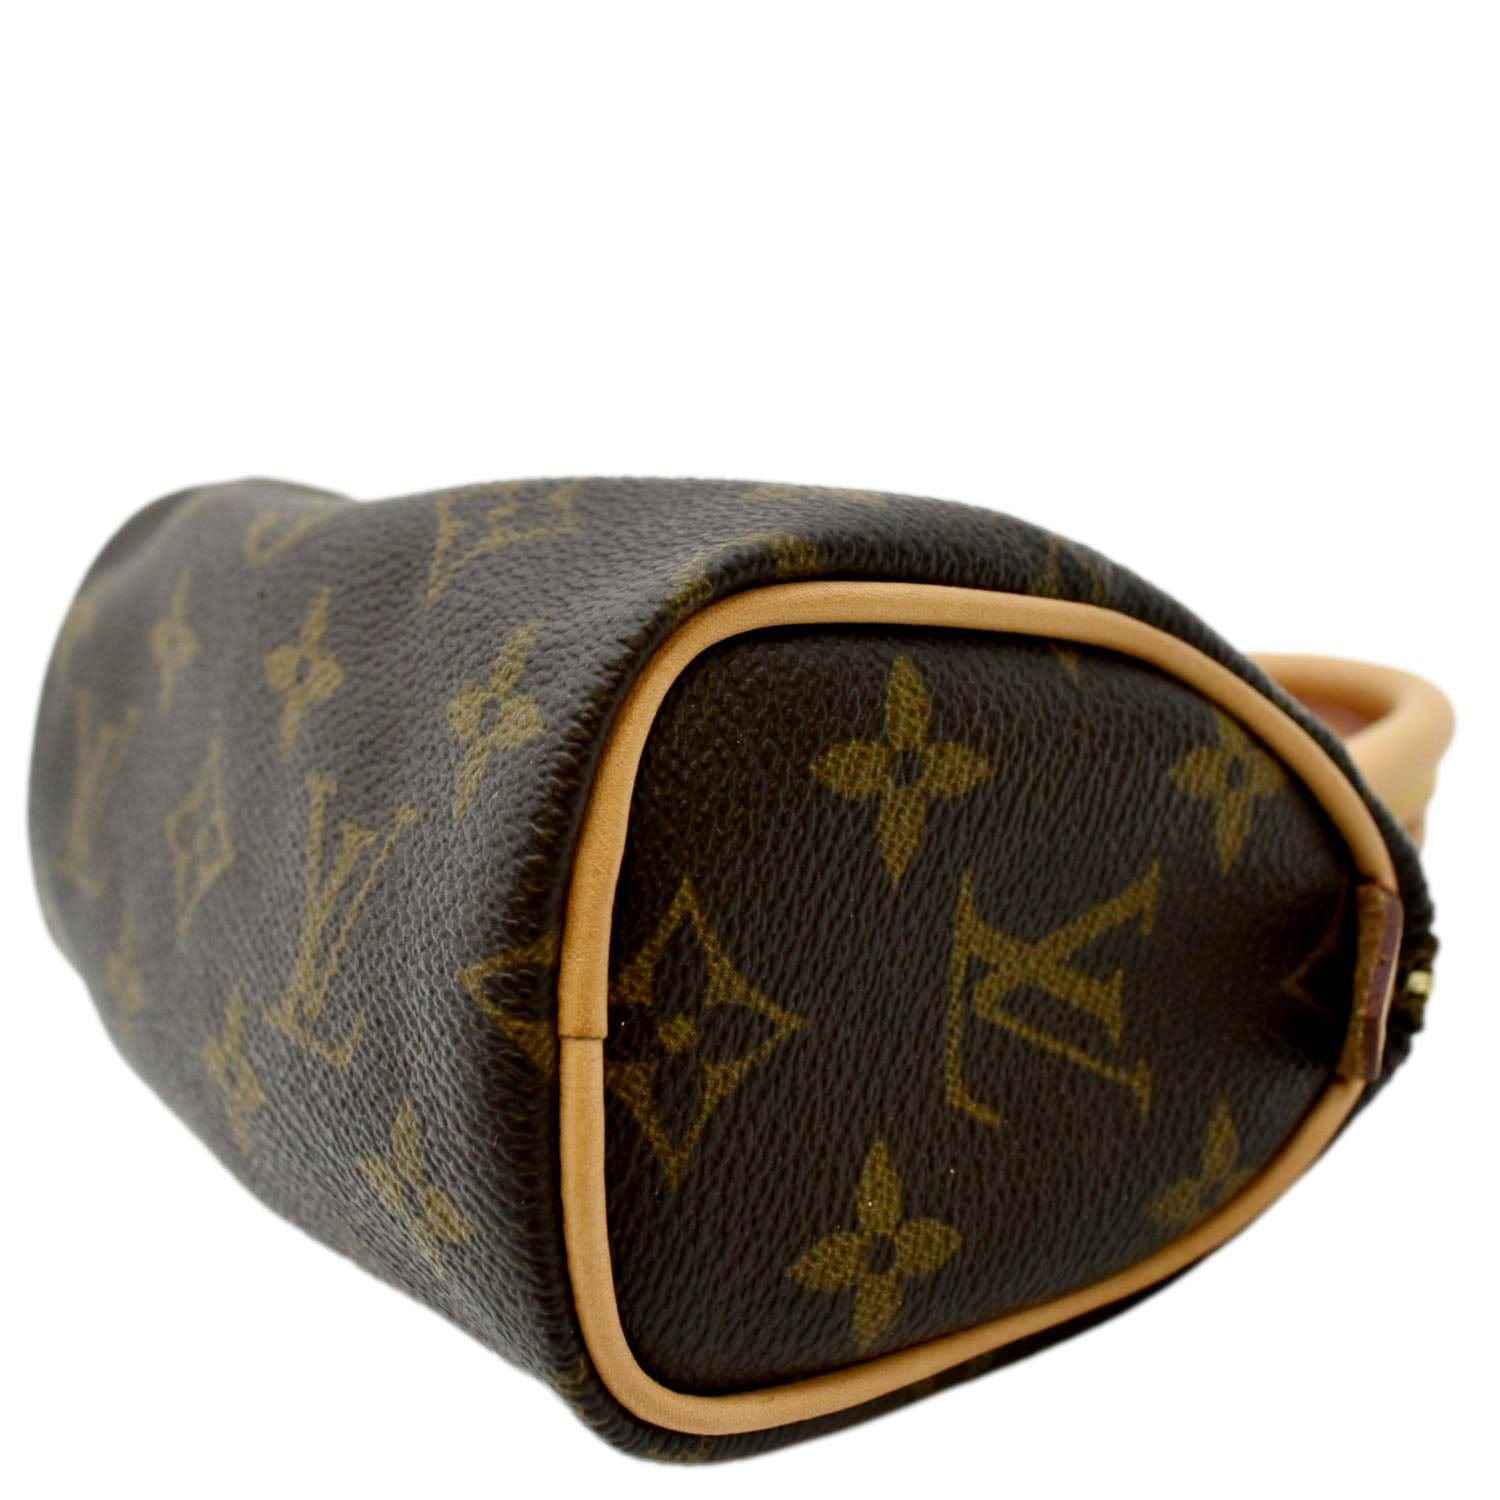 Louis Vuitton Monogram Canvas and Leather Mini HL Speedy Bag at 1stDibs